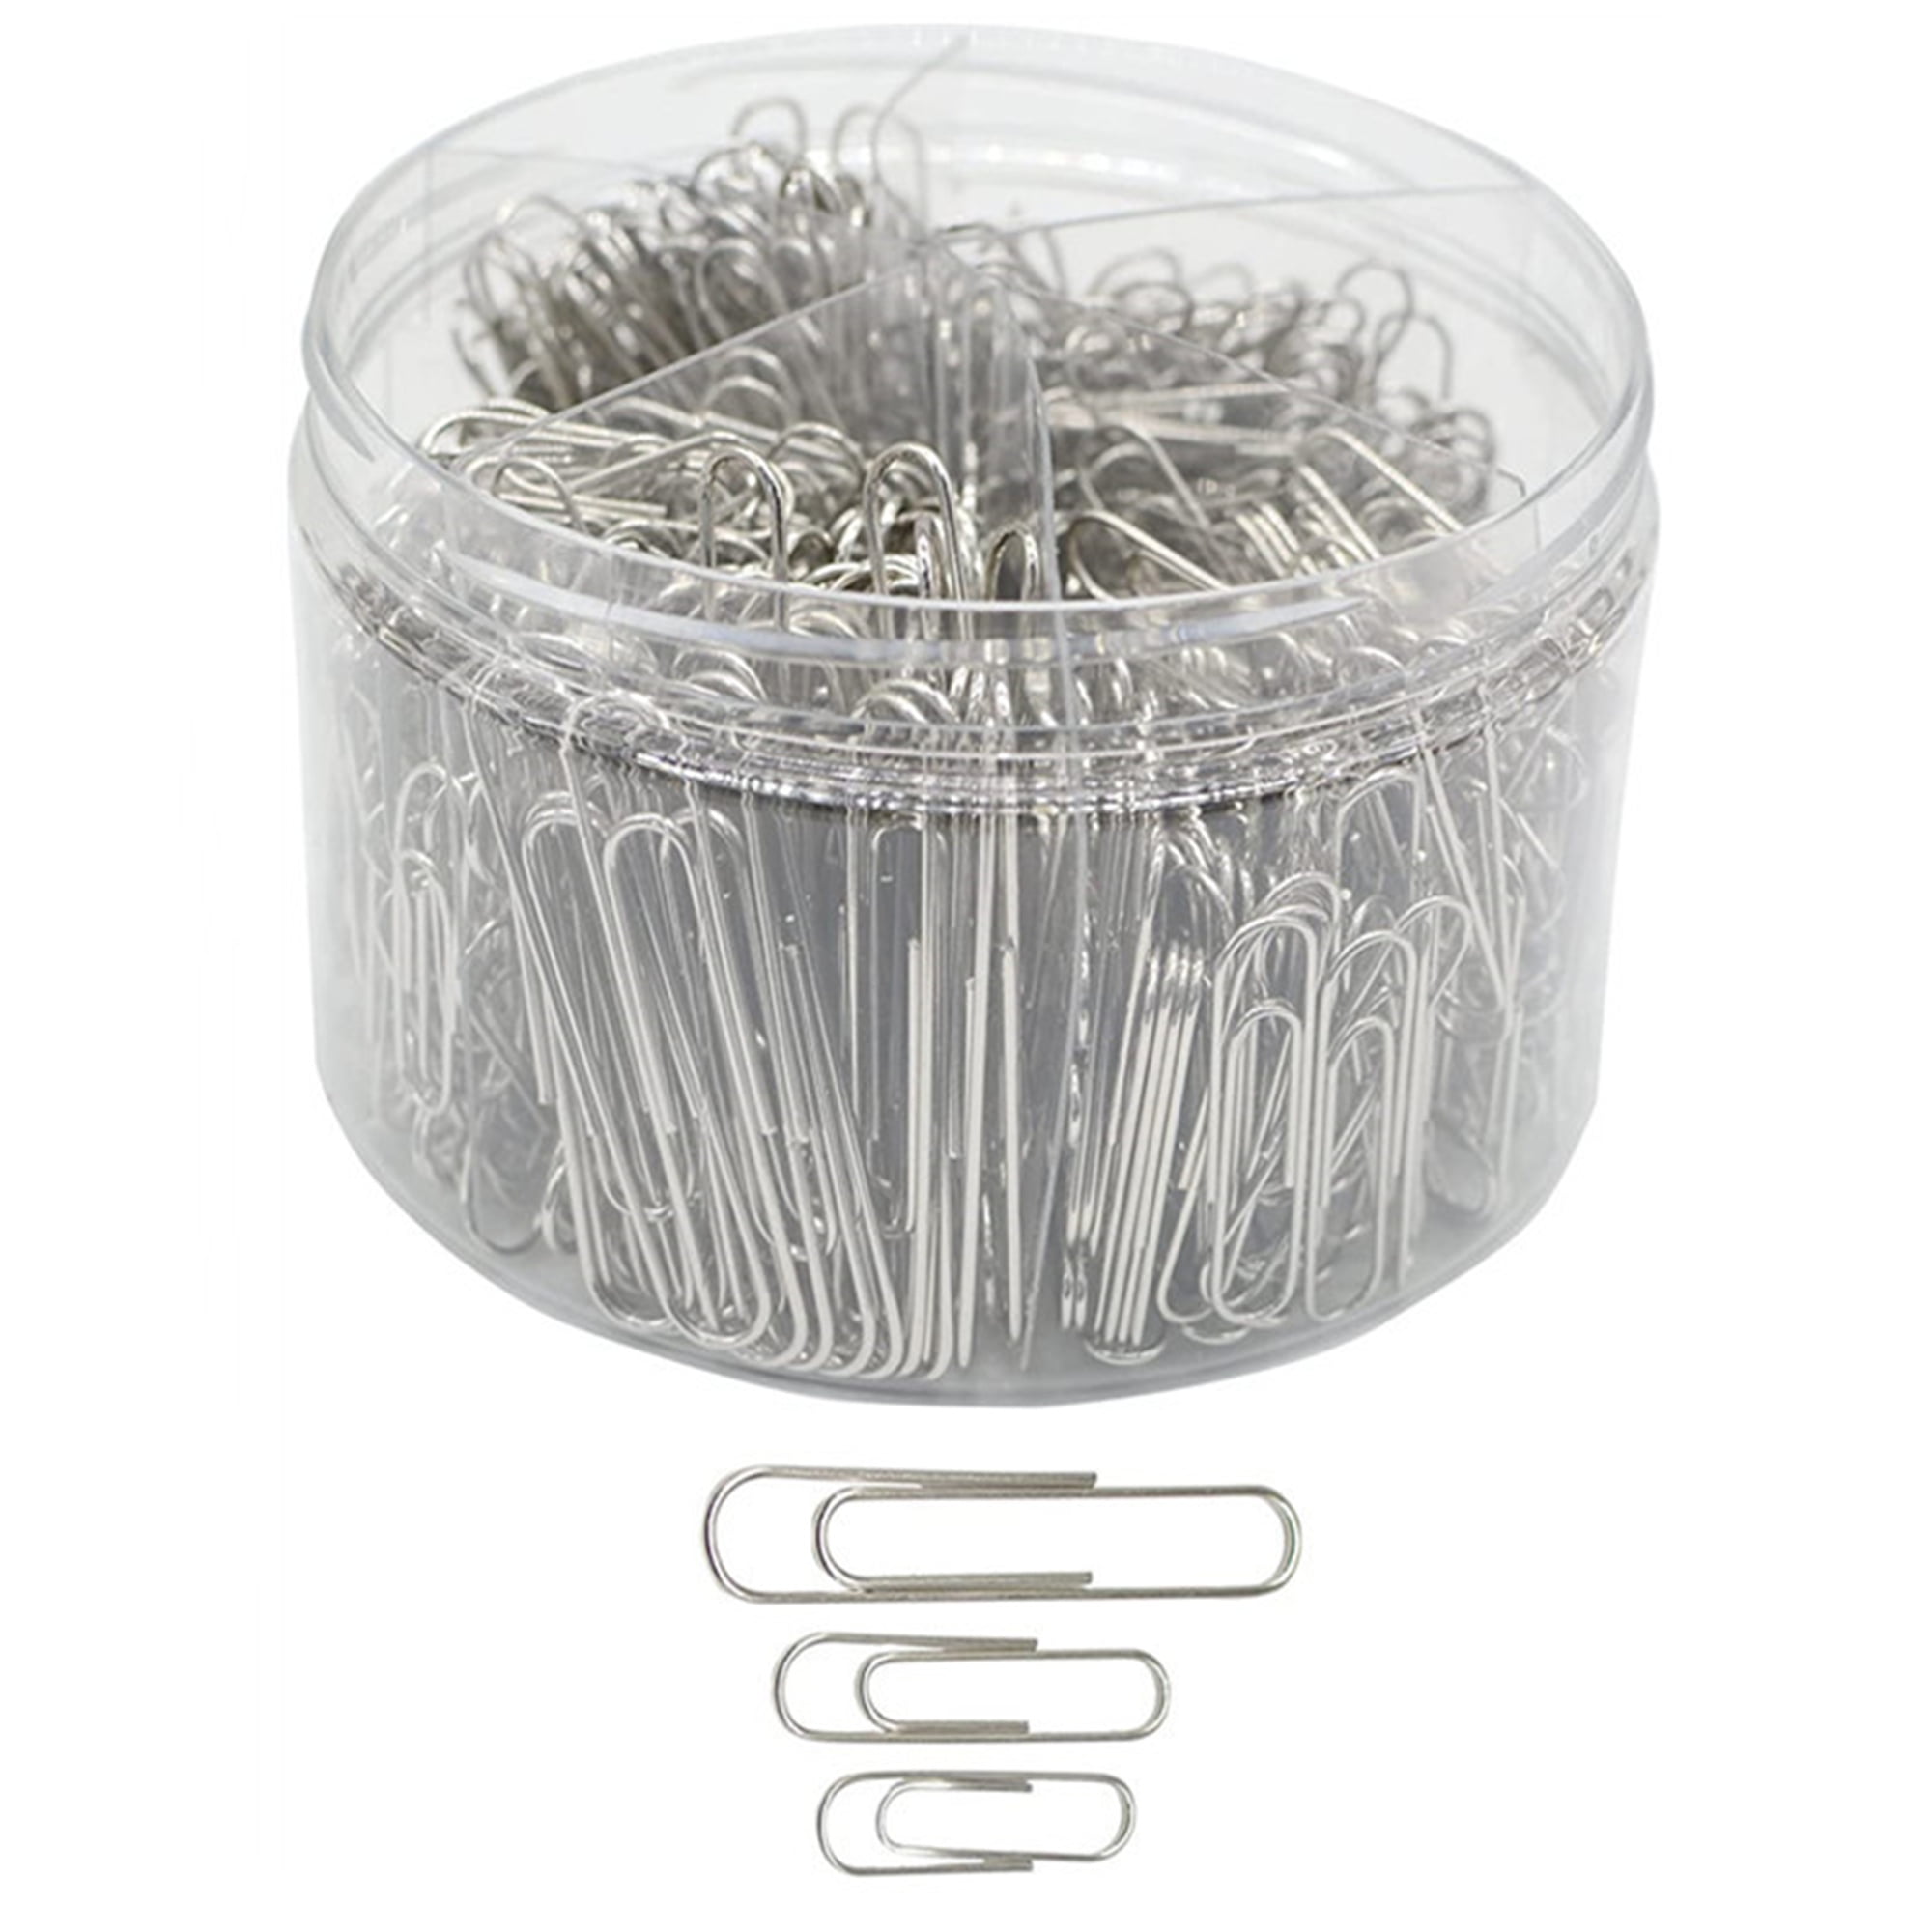 Paper Clips 2 Assorted Sizes 450 Count Paperclips Large Jumbo 50mm